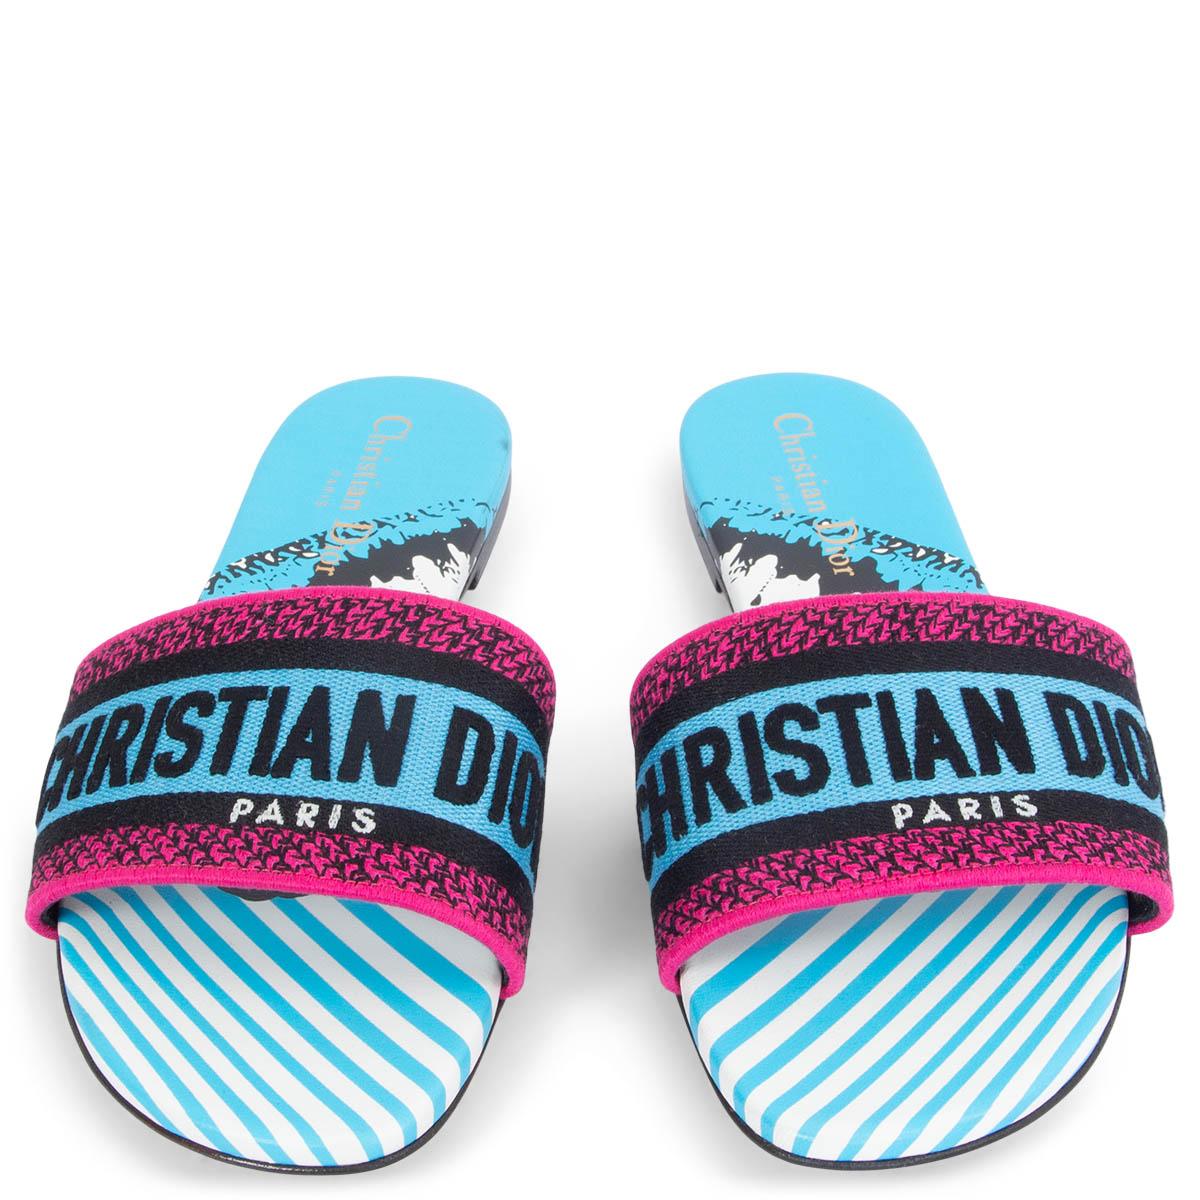 100% authentic Christian Dior 2022 D-Way slide sandals D-Jungle Pop in hot pink, blue, black and white. Brand new. Come with dust bag. 

Measurements
Imprinted Size	38
Shoe Size	38
Inside Sole	25cm (9.8in)
Width	8cm (3.1in)
Heel	1cm (0.4in)

All our